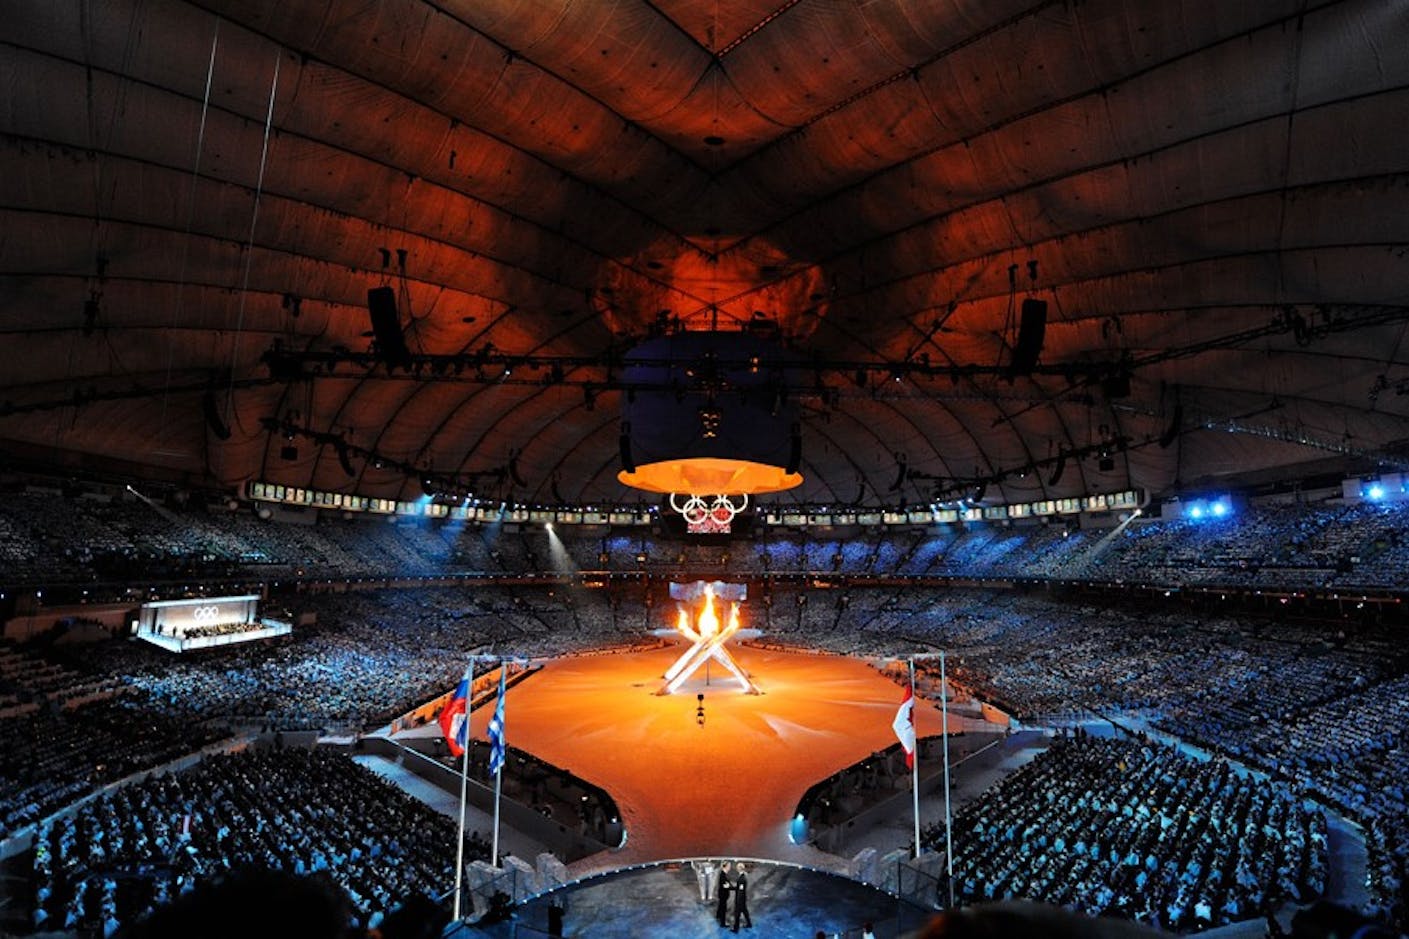 Vancouver 2010: Olympic venues' legacy measured not just in dollars -  Entertainment, Media & Sports